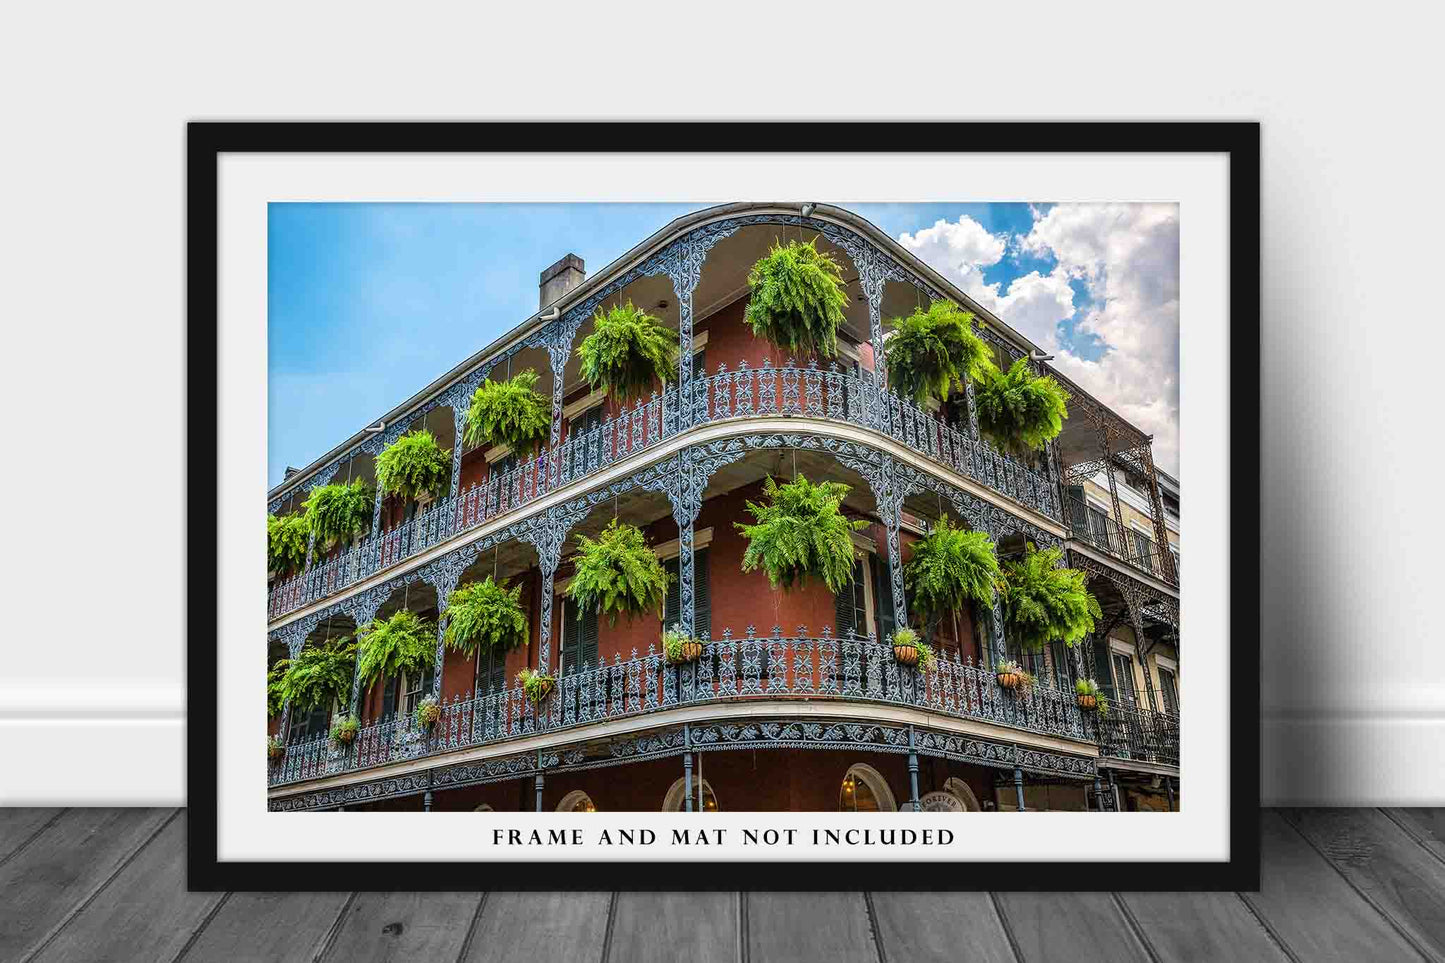 NOLA Photography Print (Not Framed) Picture of Corner Building with Hanging Ferns in New Orleans Louisiana Wall Art French Quarter Decor